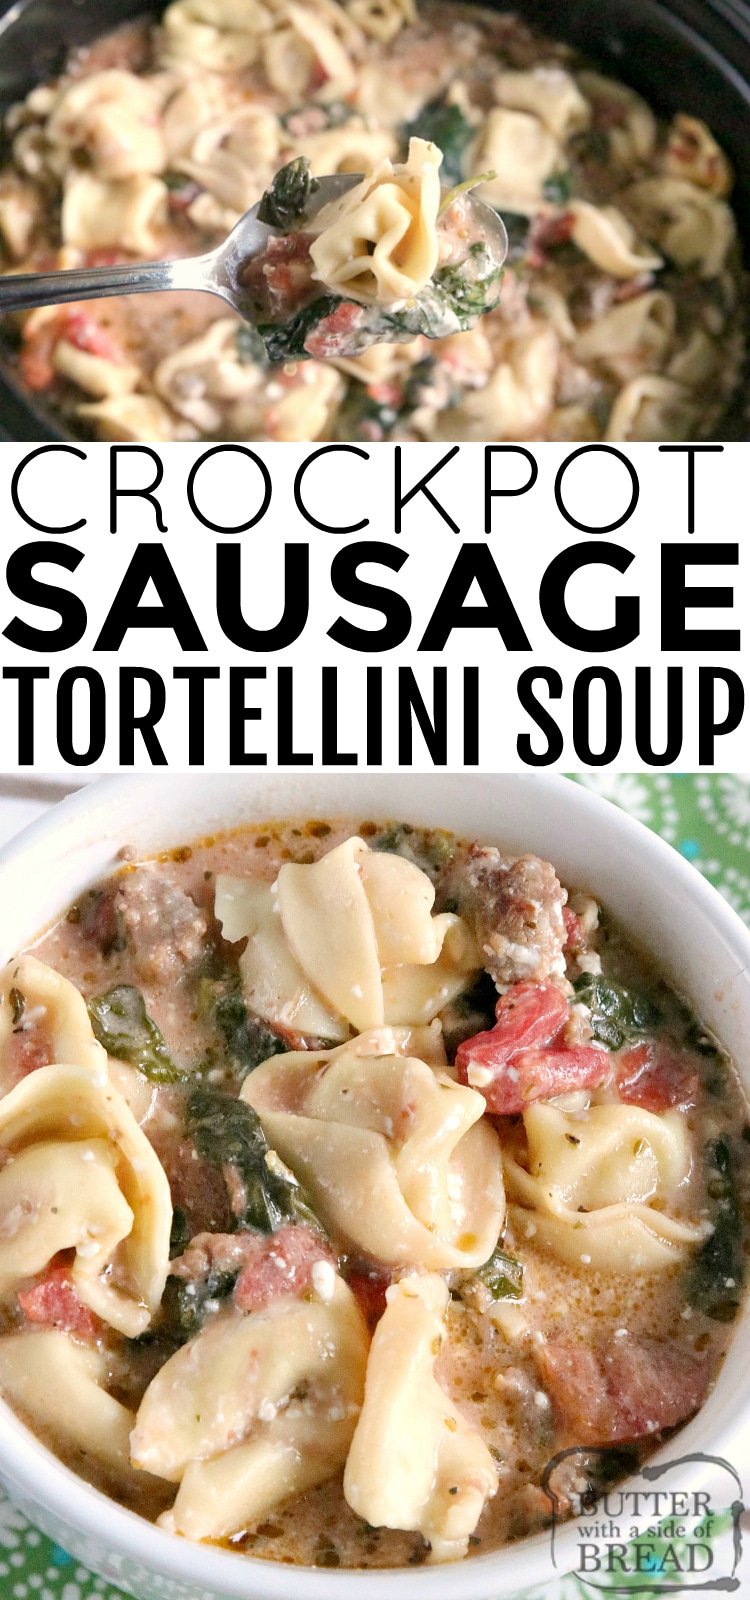 Crockpot Sausage Tortellini Soup made with Italian sausage, tortellini, fresh spinach, canned tomatoes in a flavorful creamy broth.